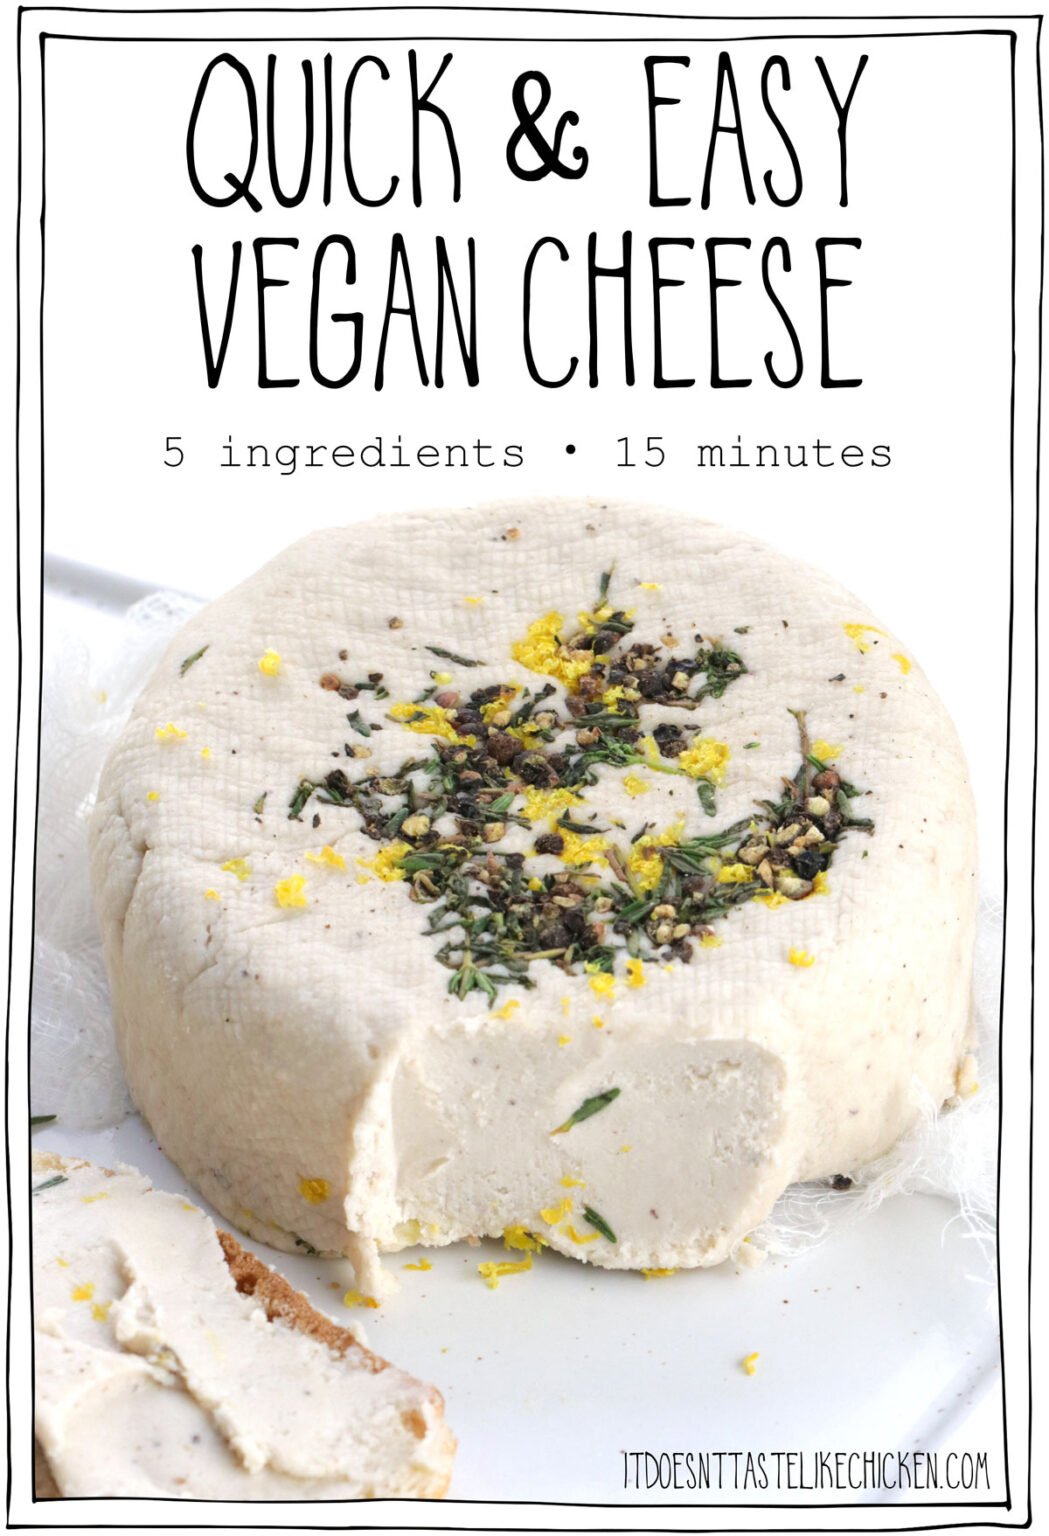 Quick & Easy Vegan Cheese • It Doesn't Taste Like Chicken